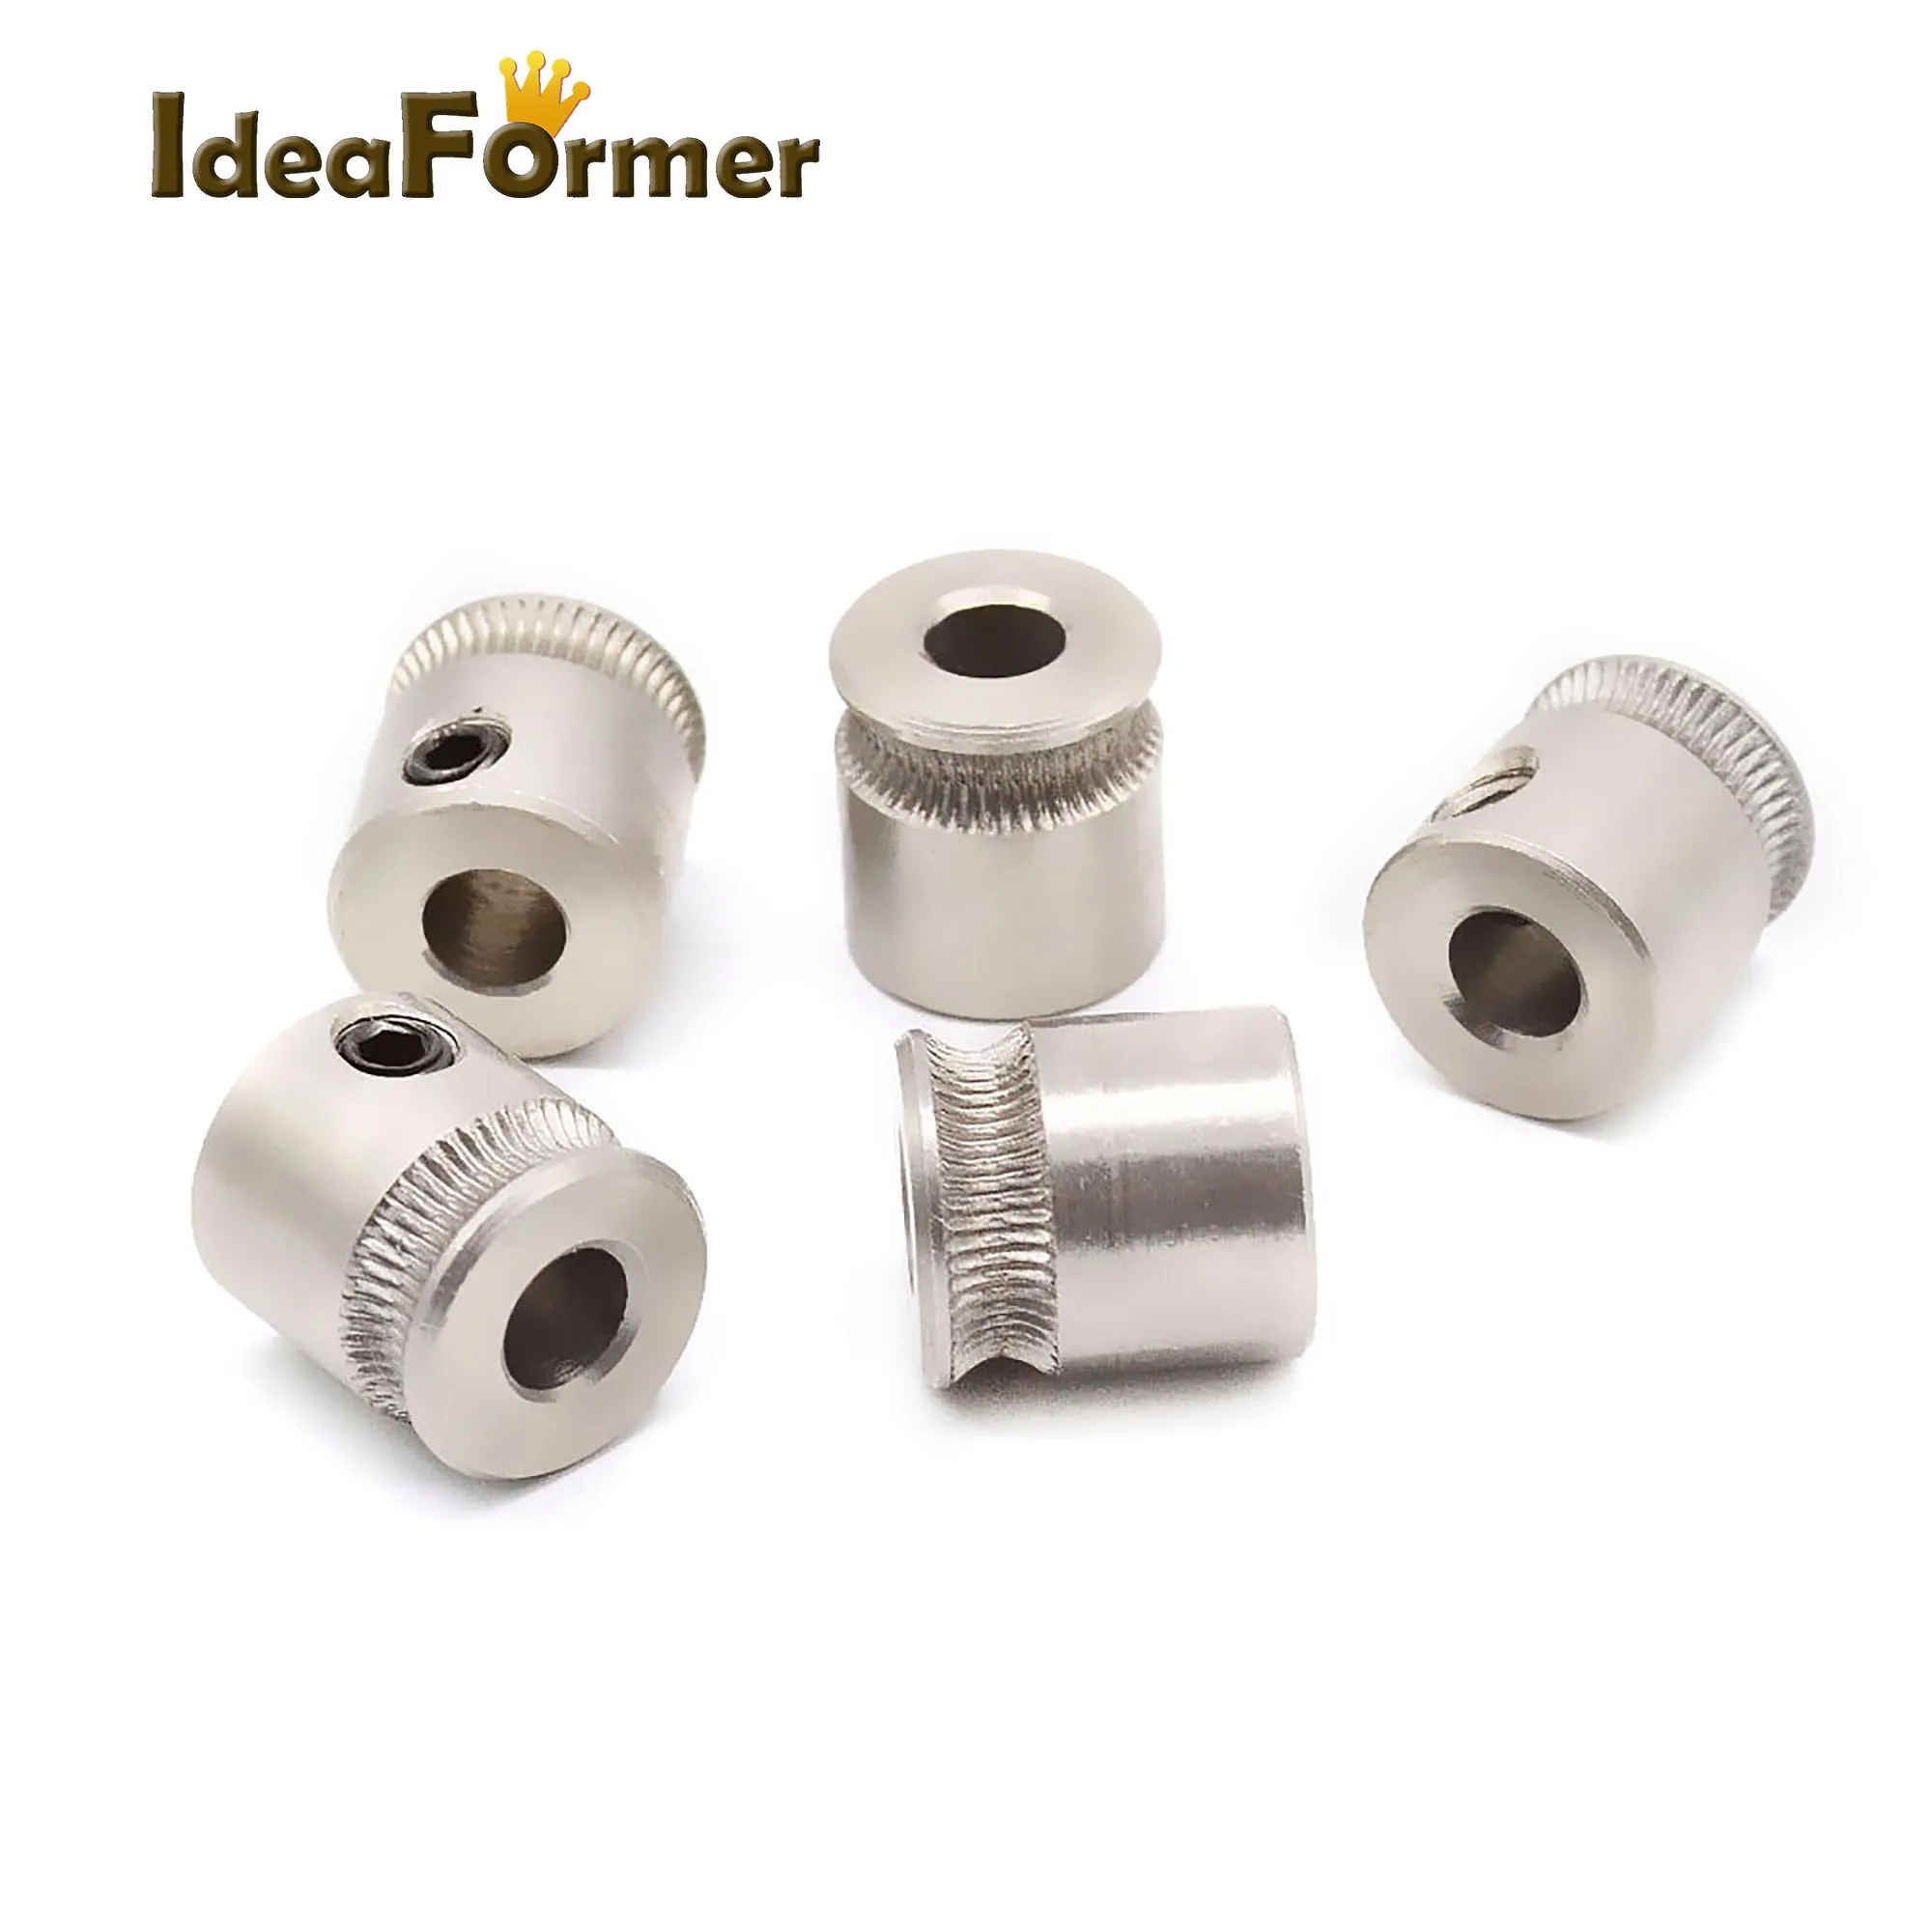 

5Pcs 3D Printer MK7/MK8 Extruder V-Groove Drive Gear Bore 5mm Stainless Steel Wheel For MK Extruder 1.75mm&3.0mm filament.